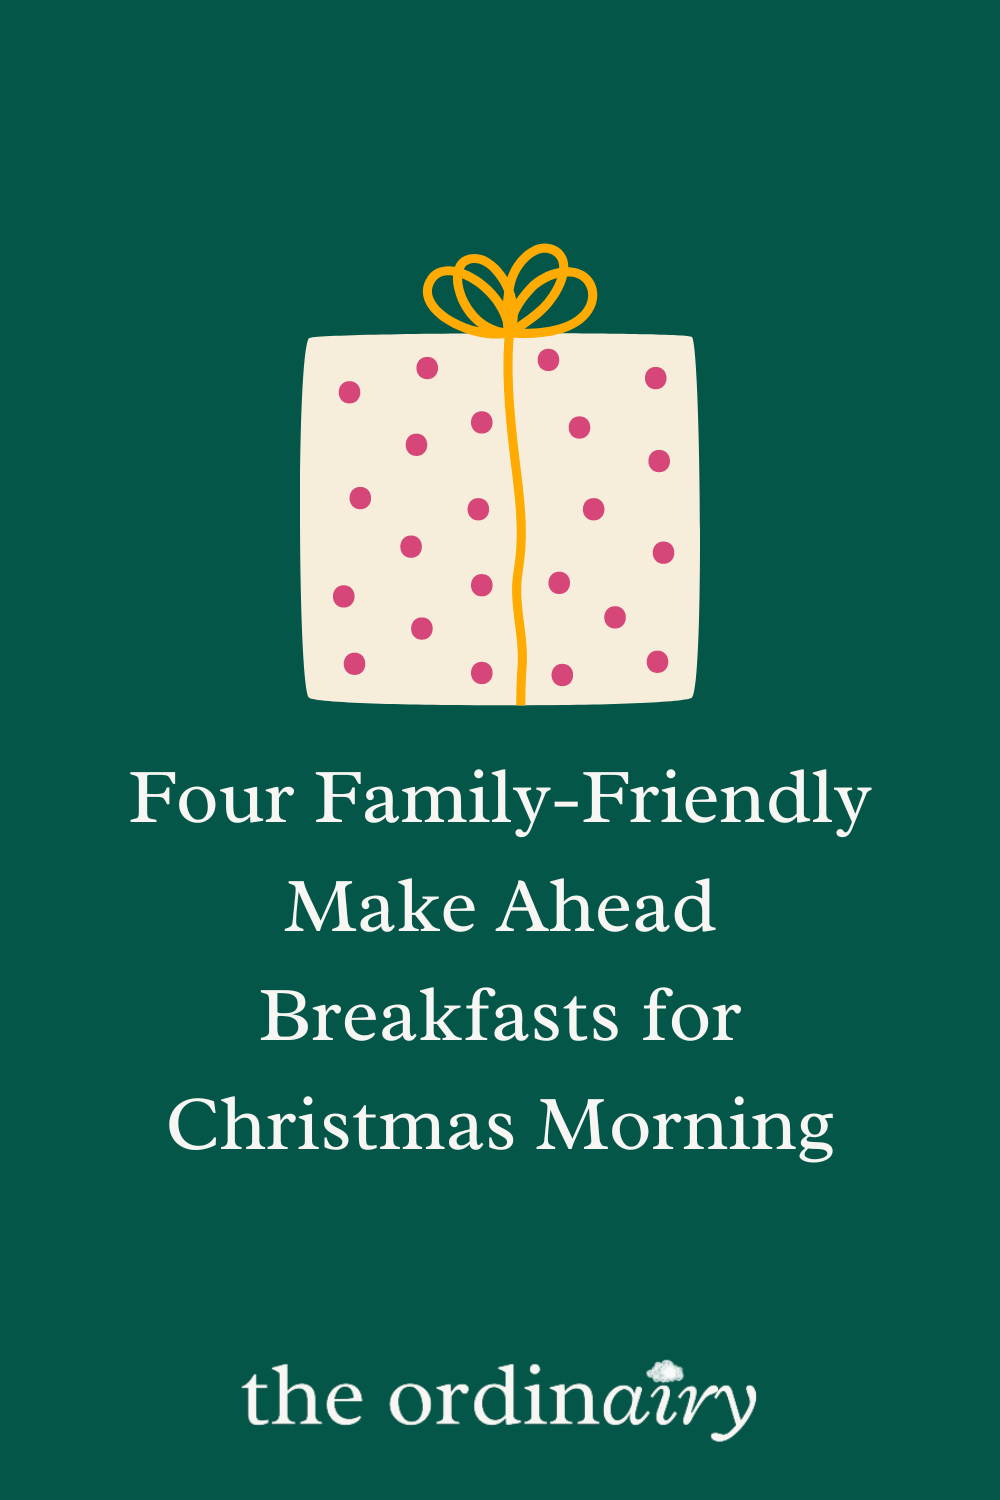 Four Family-Friendly Make Ahead Breakfasts for Christmas Morning